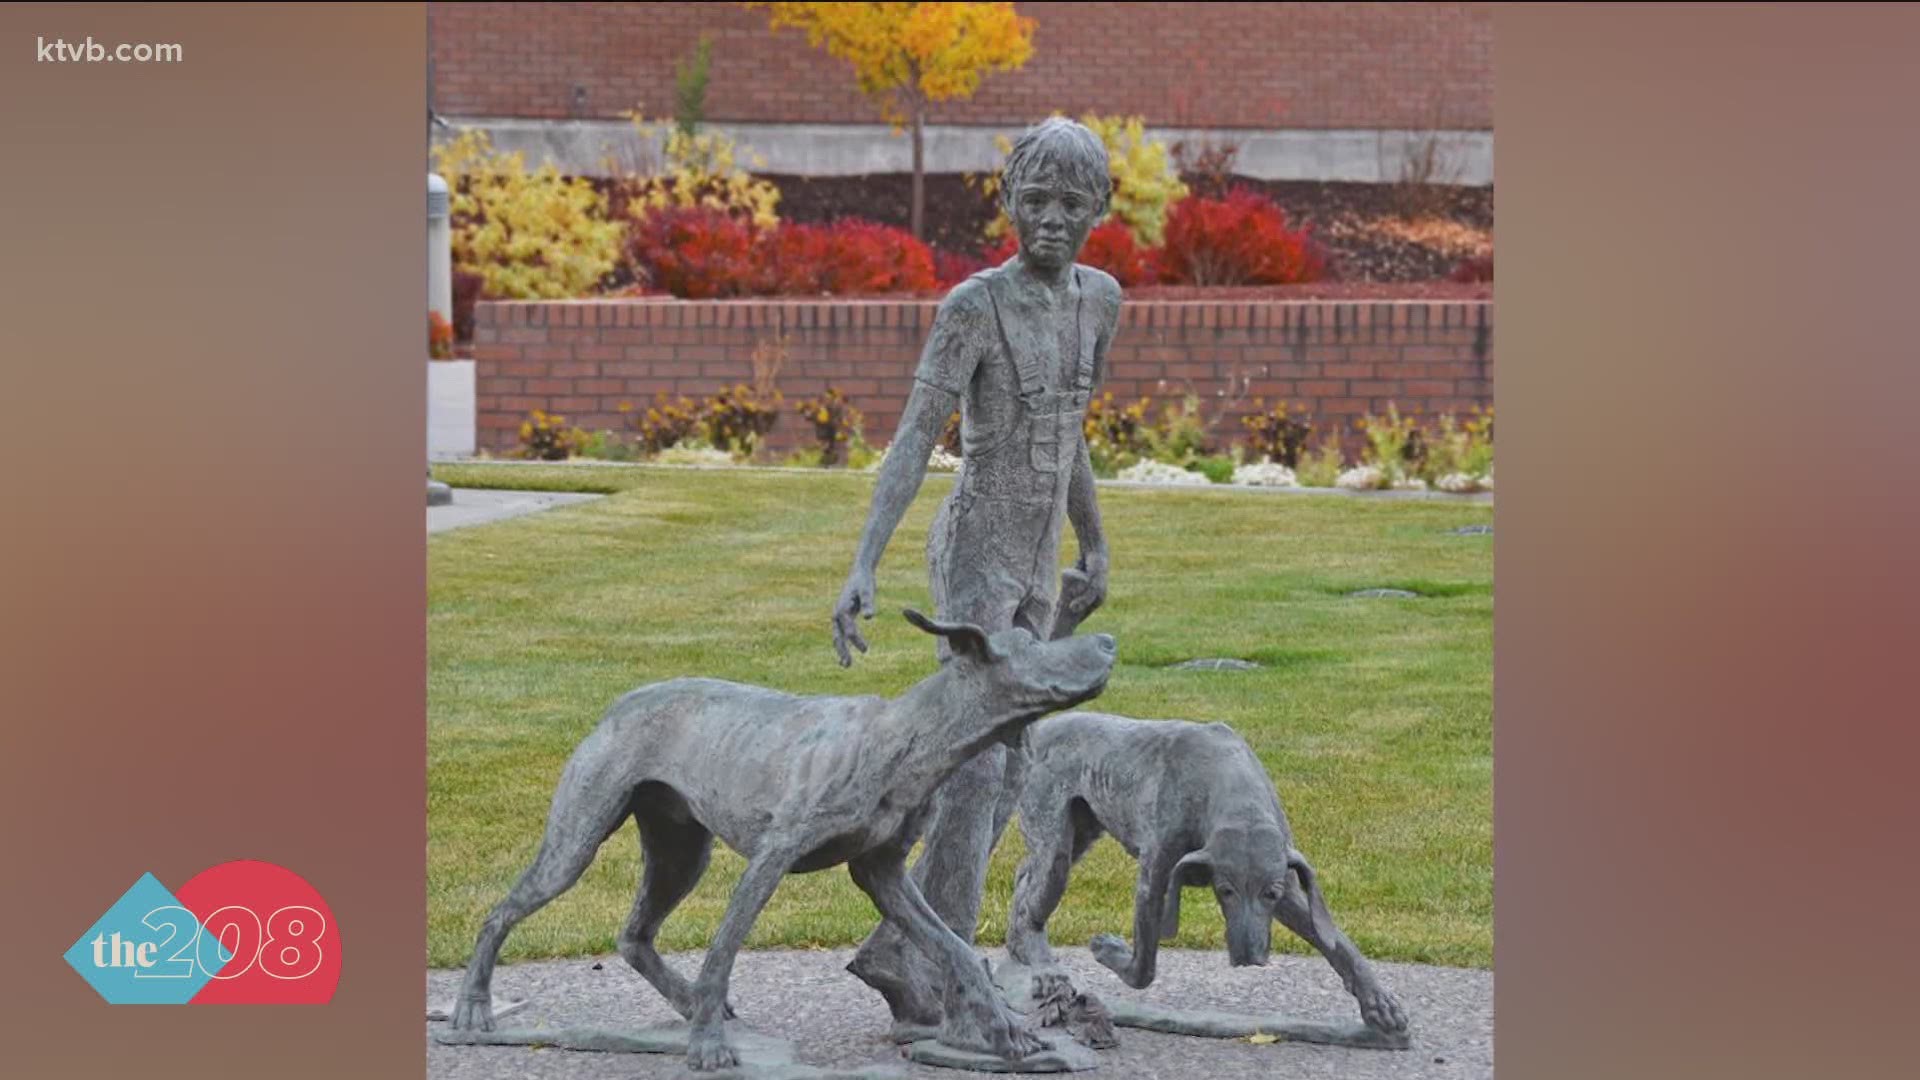 As a tribute to the late author, the Idaho Falls Library installed a life-sized bronze statue outside their building in 1999.